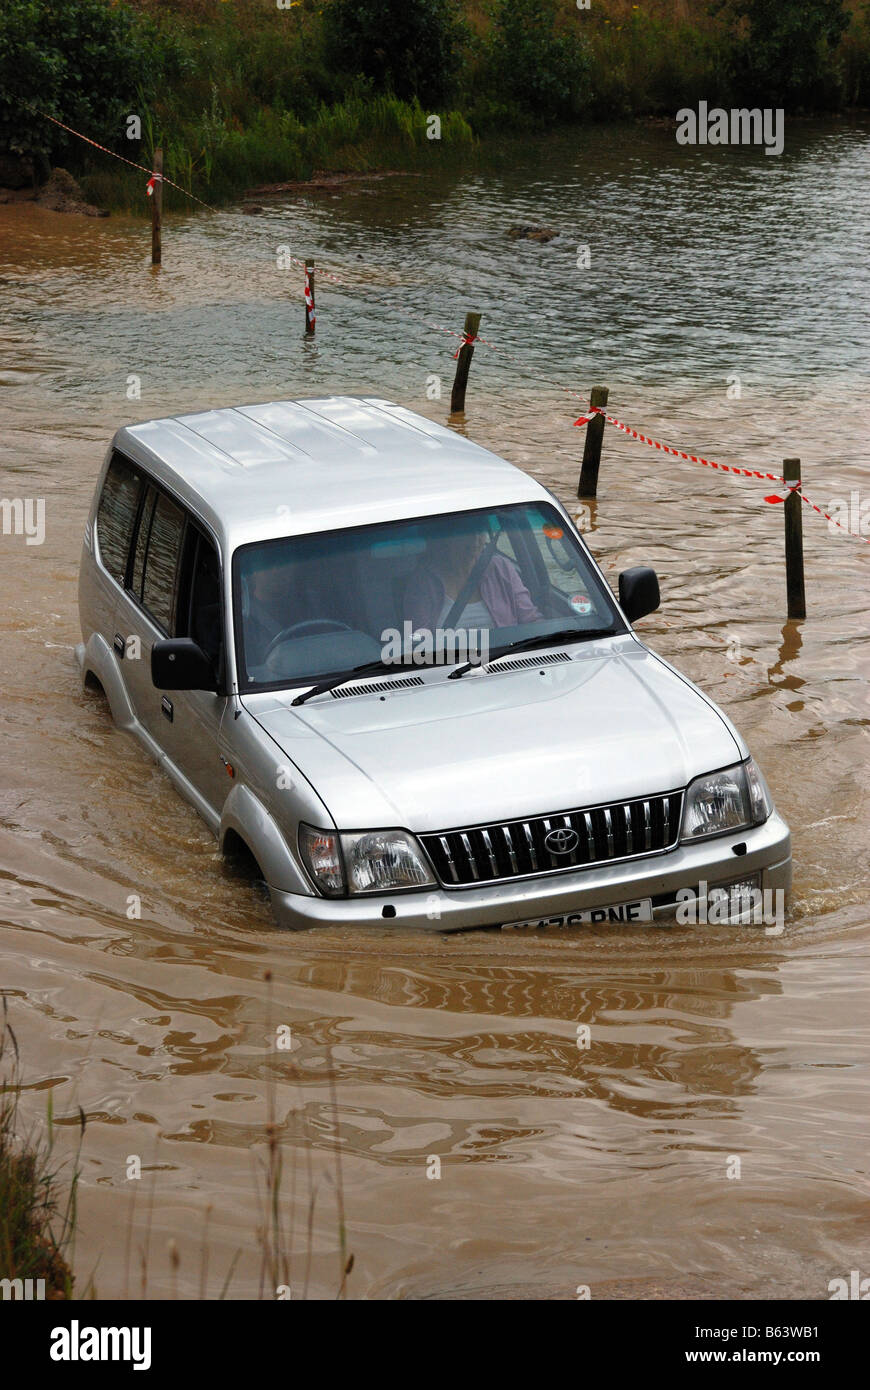 Toyota Colorado crossing water Registration number Y476 PNE 4WD four wheel drive LRM Show Billing 2008 Land Rover Monthly 4 x 4 Stock Photo